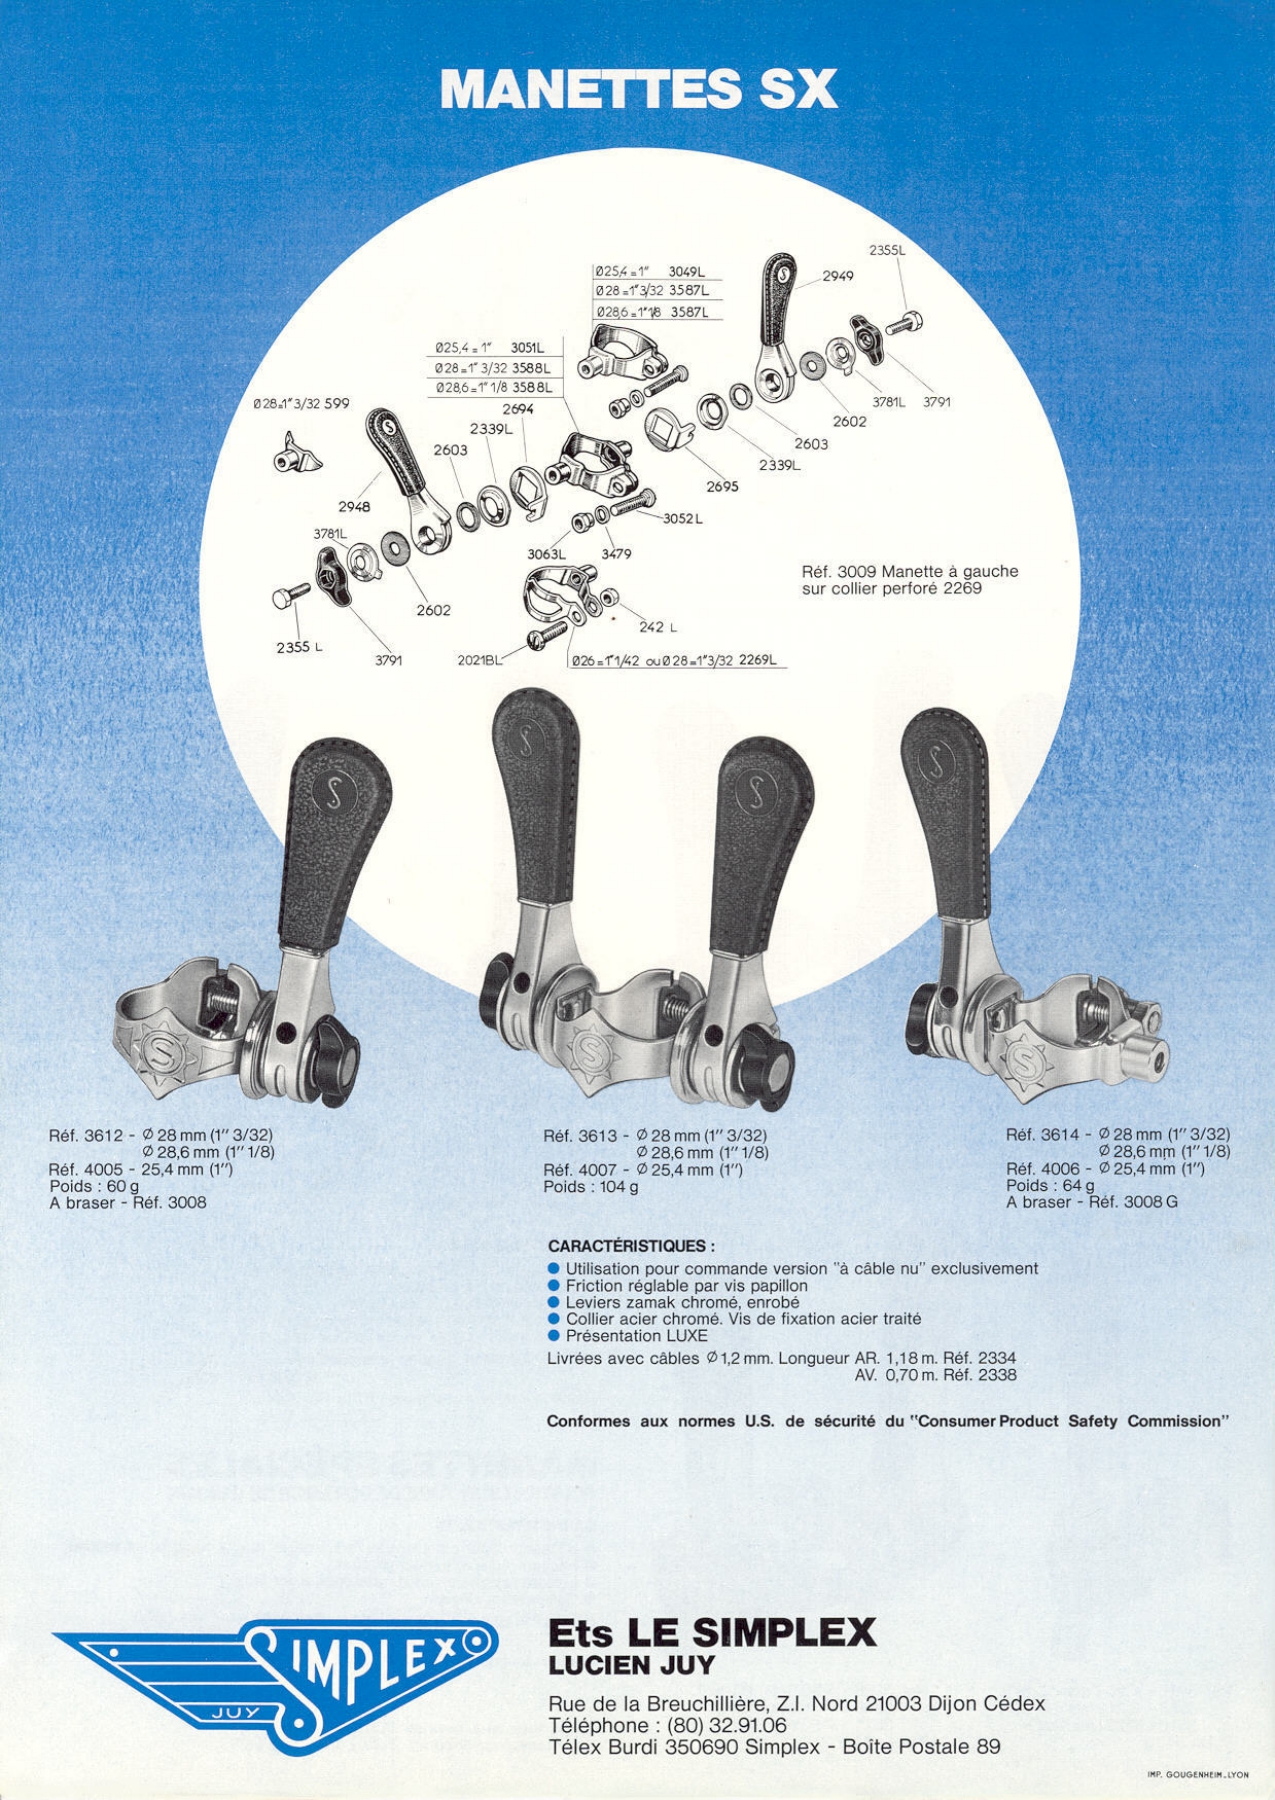 Simplex - Product Sheets (09-1975)